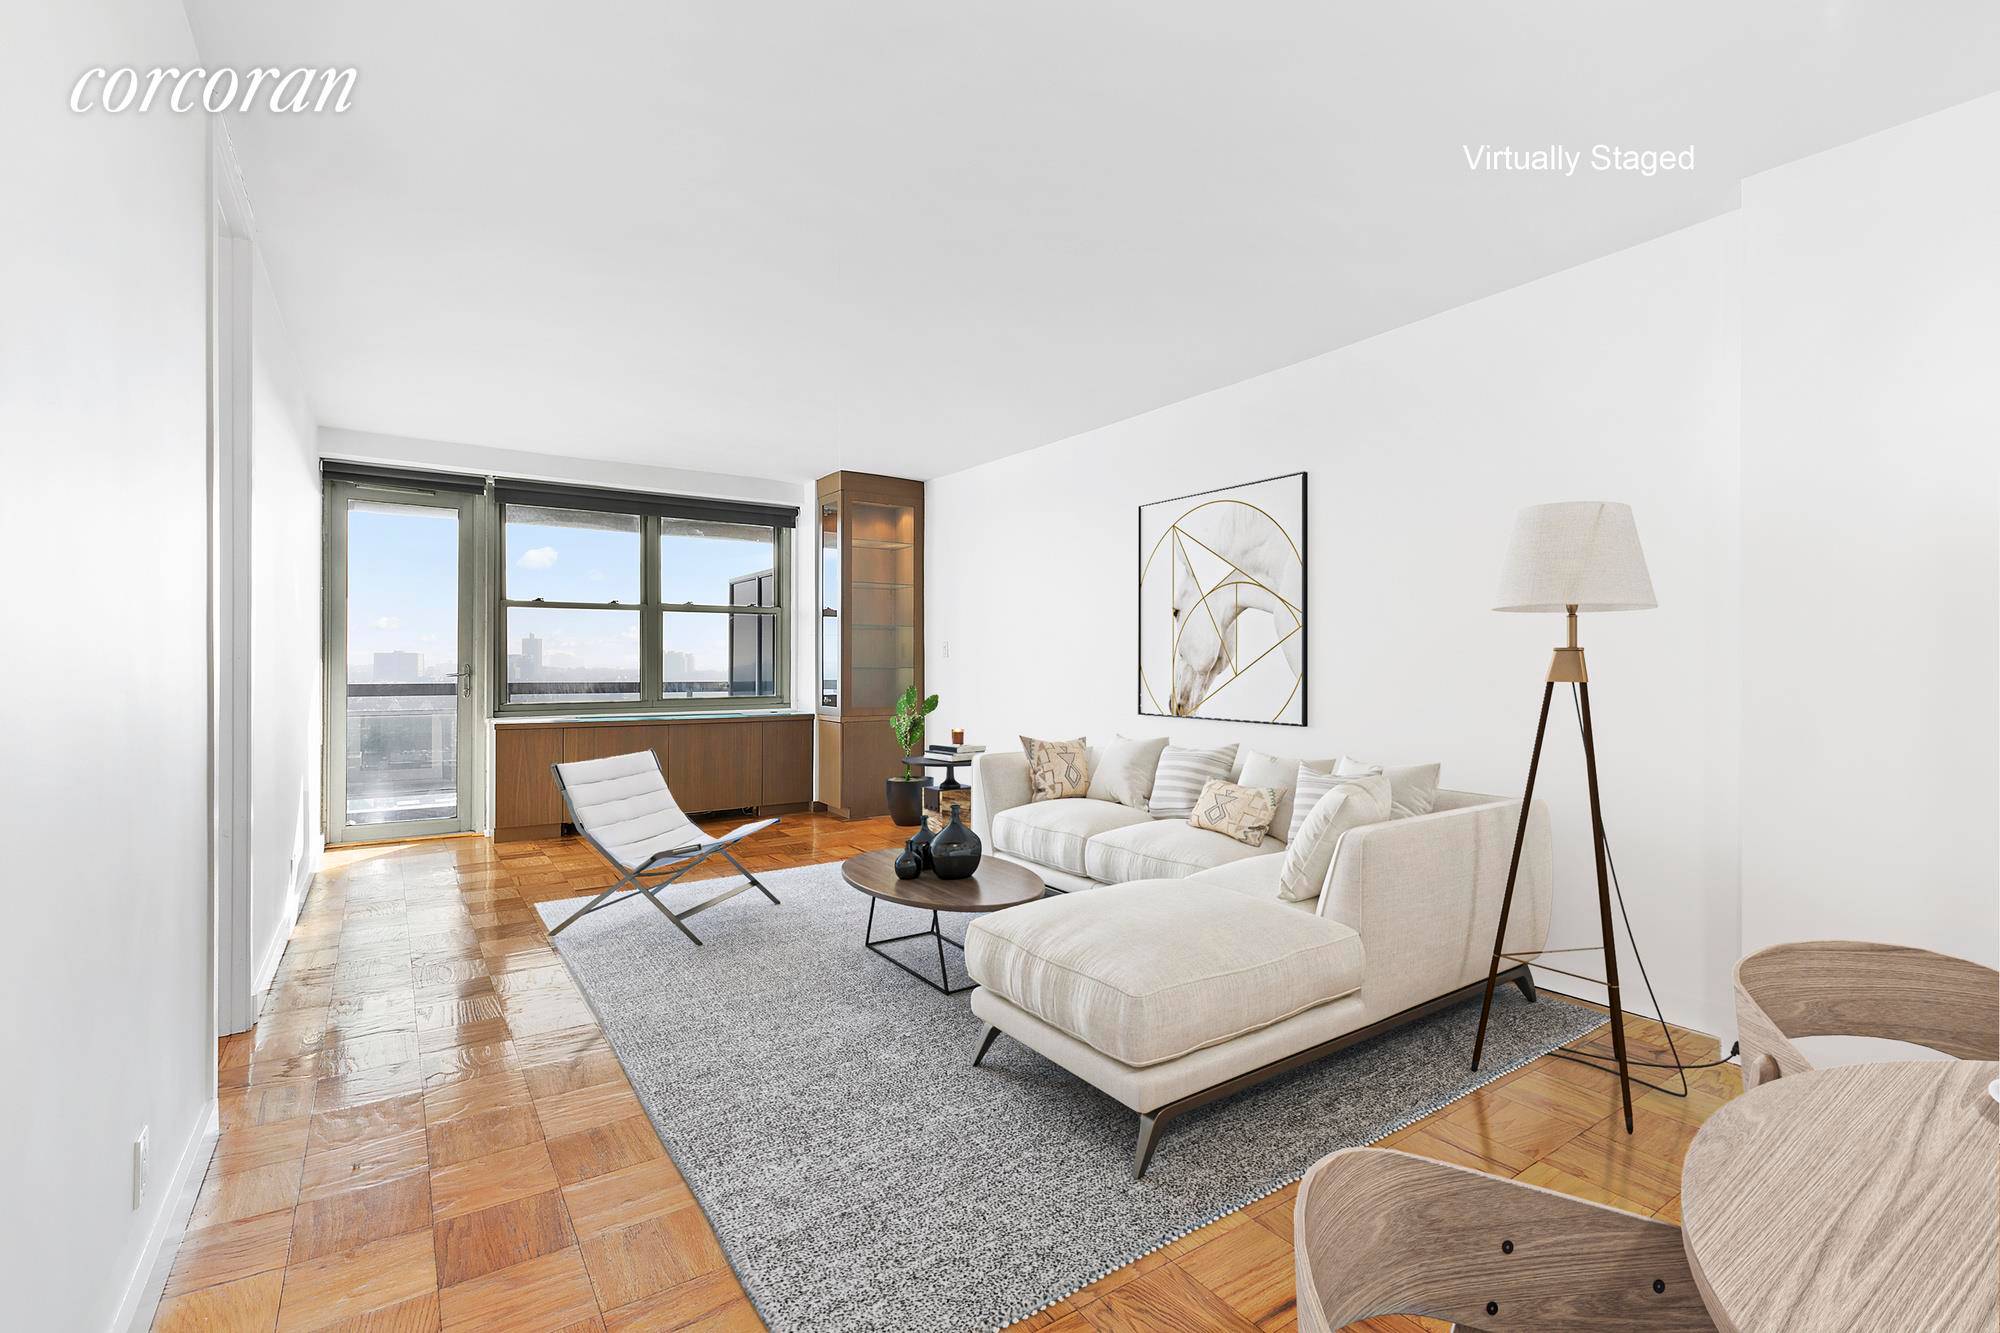 Located at 70 25 Yellowstone Boulevard, this contemporary 1 BR 1 BA home is bright and sophisticated.